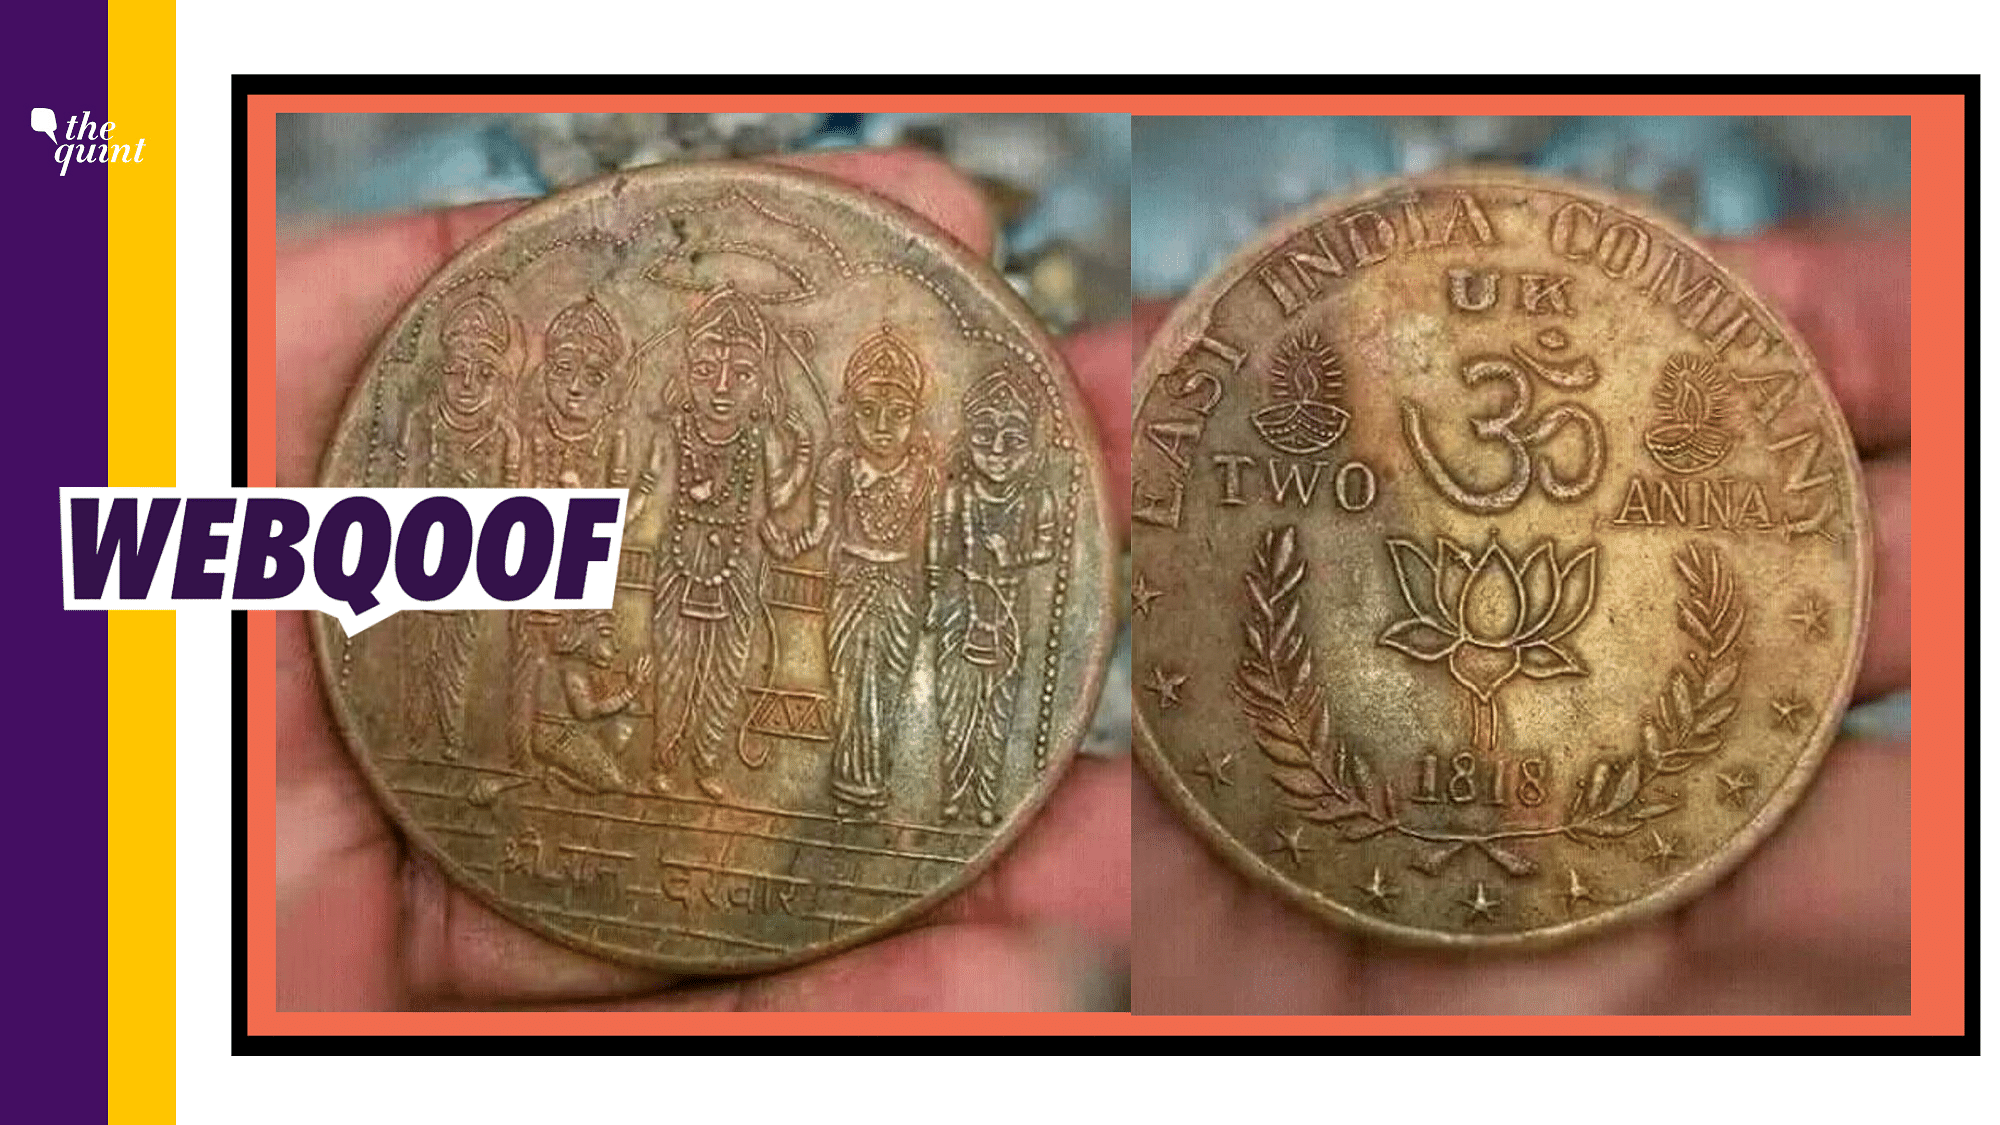 An image of an old copper coin with ‘EAST INDIA COMPANY’ written on it has been doing the rounds on social media.